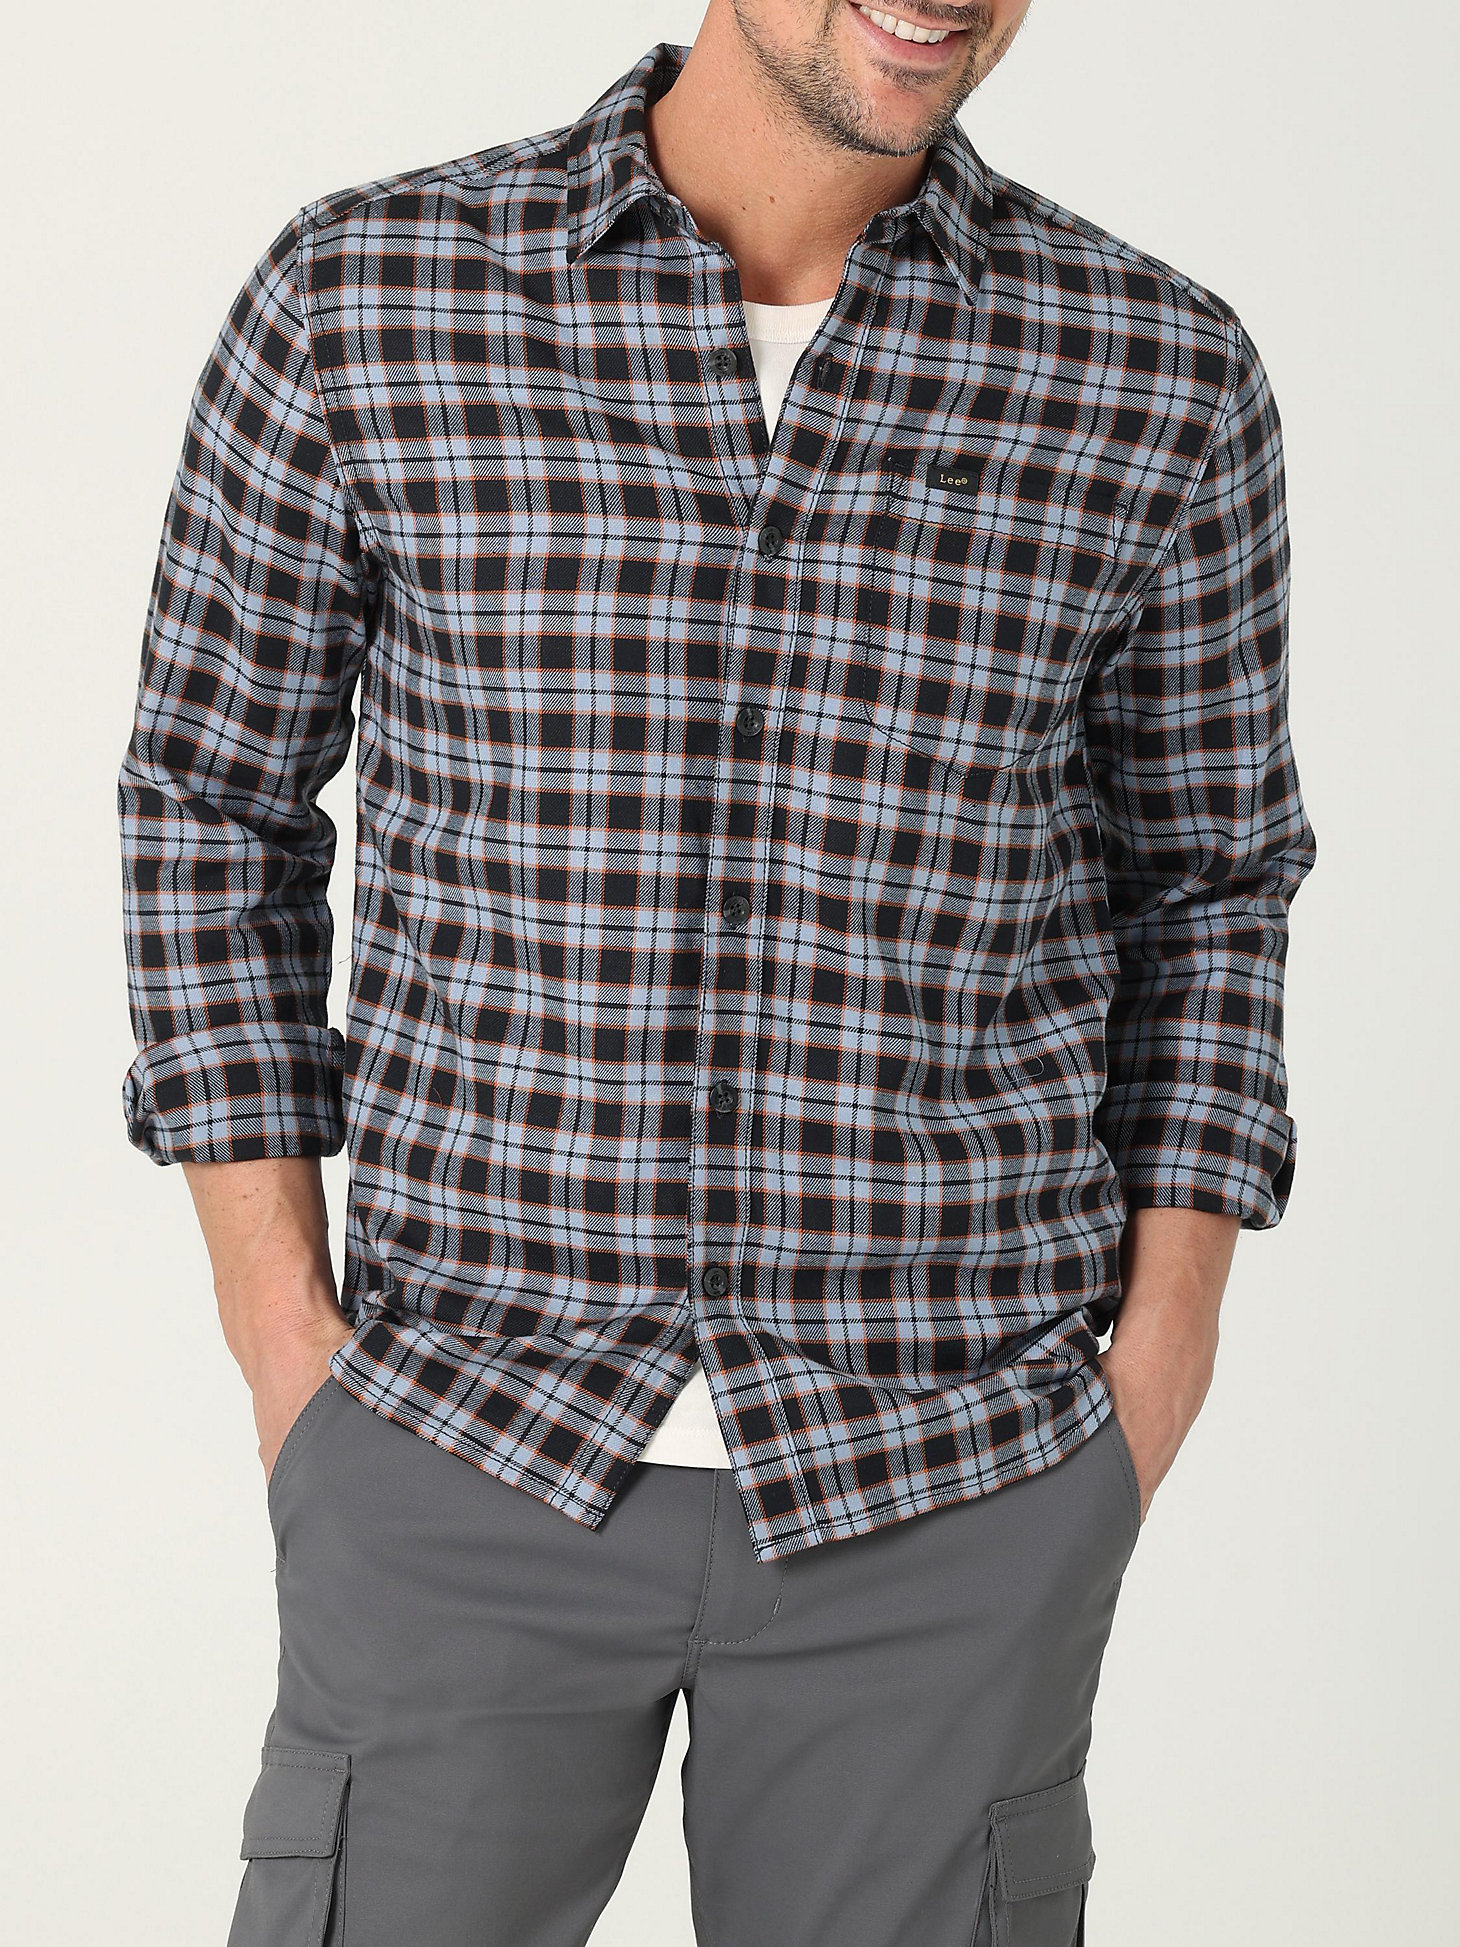 Men's Extreme Motion MVP Classic Stretch Plaid Button Down Shirt in Dreamy Black and Blue Plaid main view